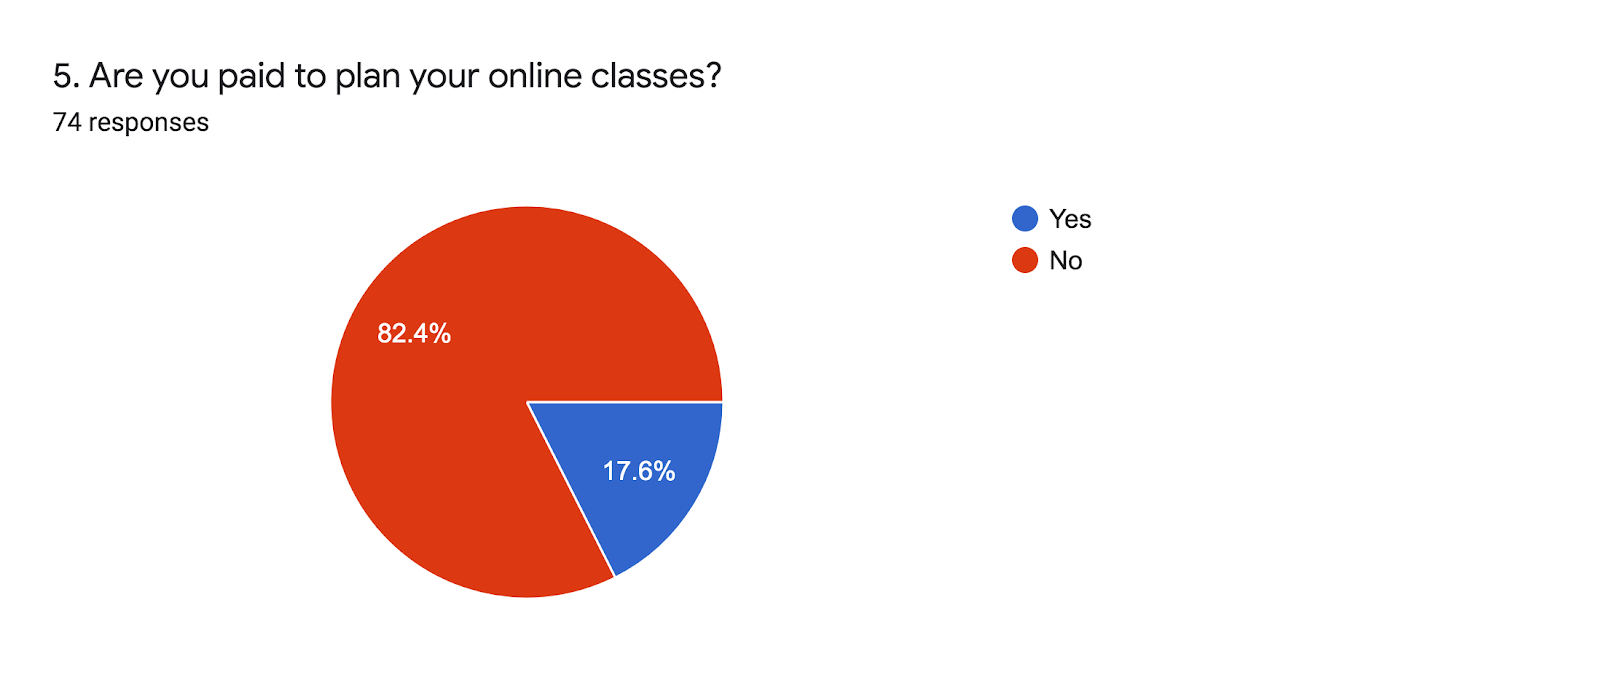 Forms response chart. Question title: 5. Are you paid to plan your online classes?. Number of responses: 74 responses.